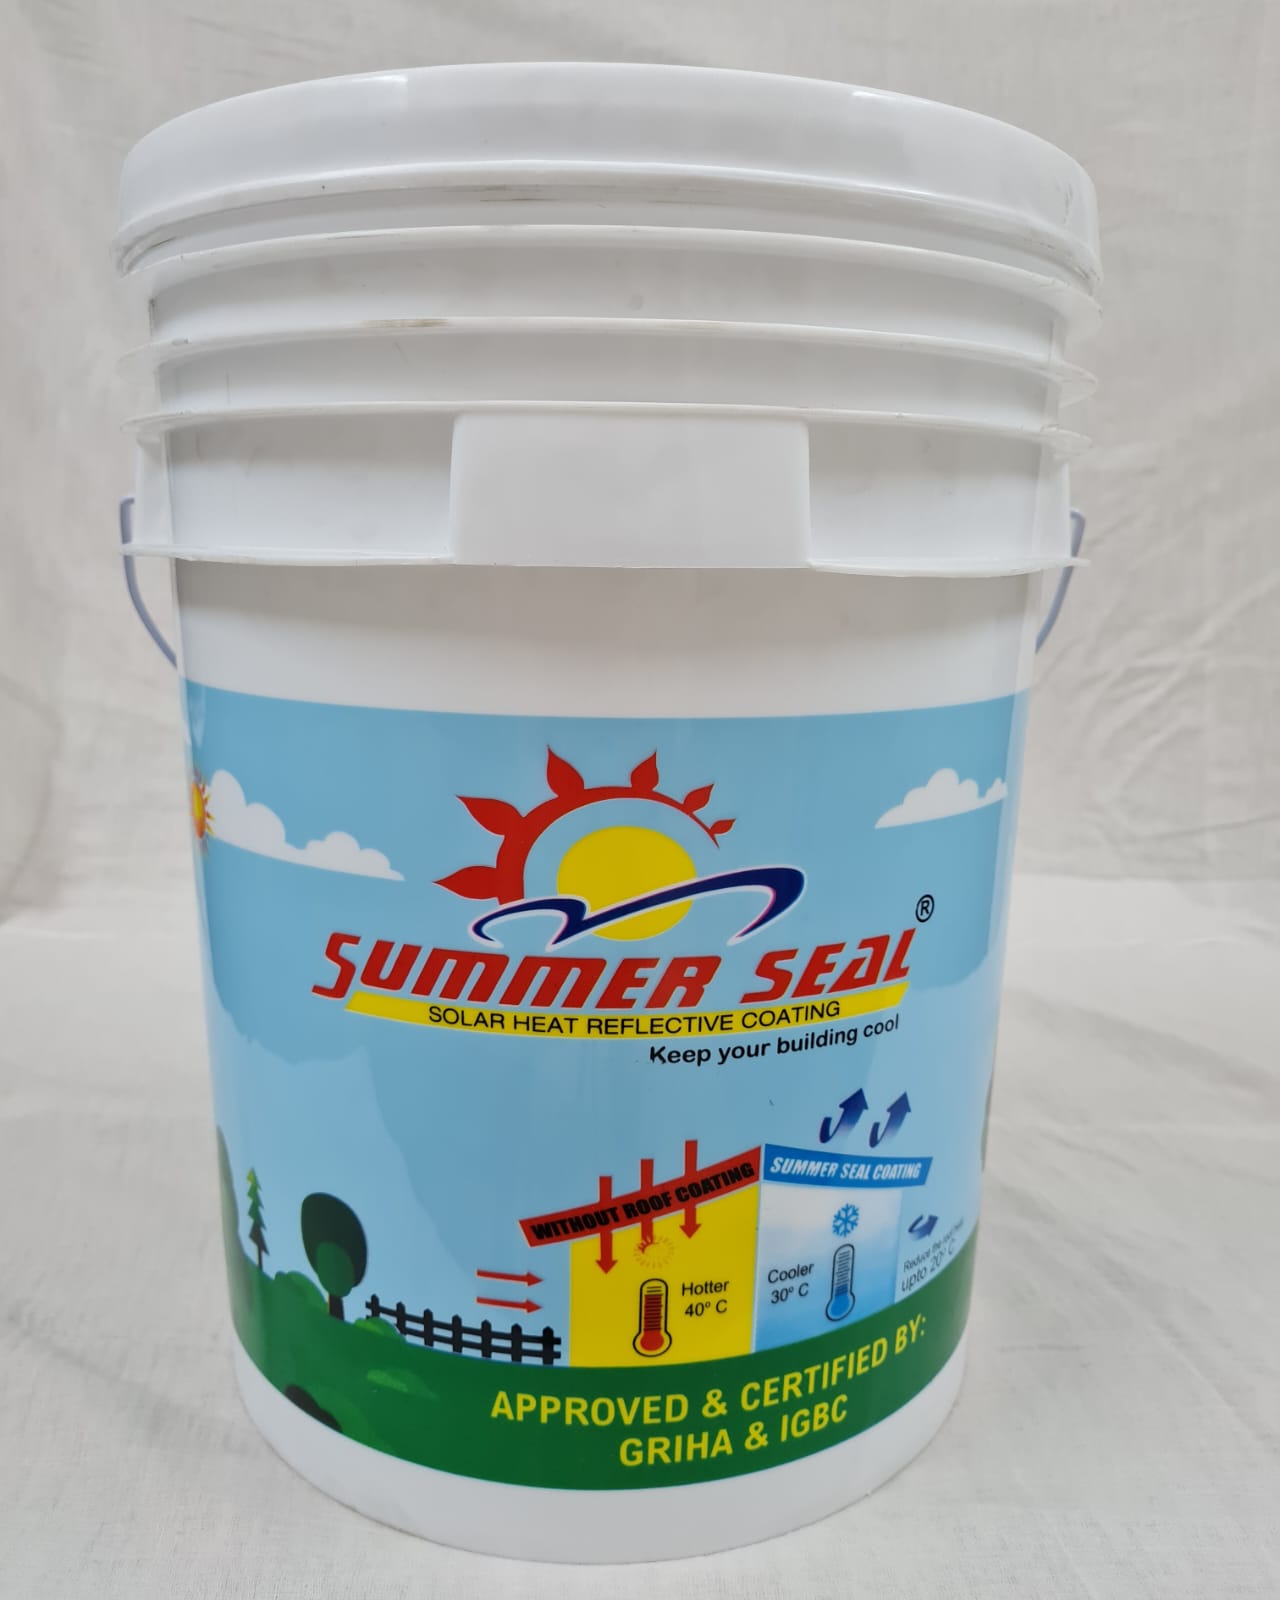 Summer Seal-Cool roof coating